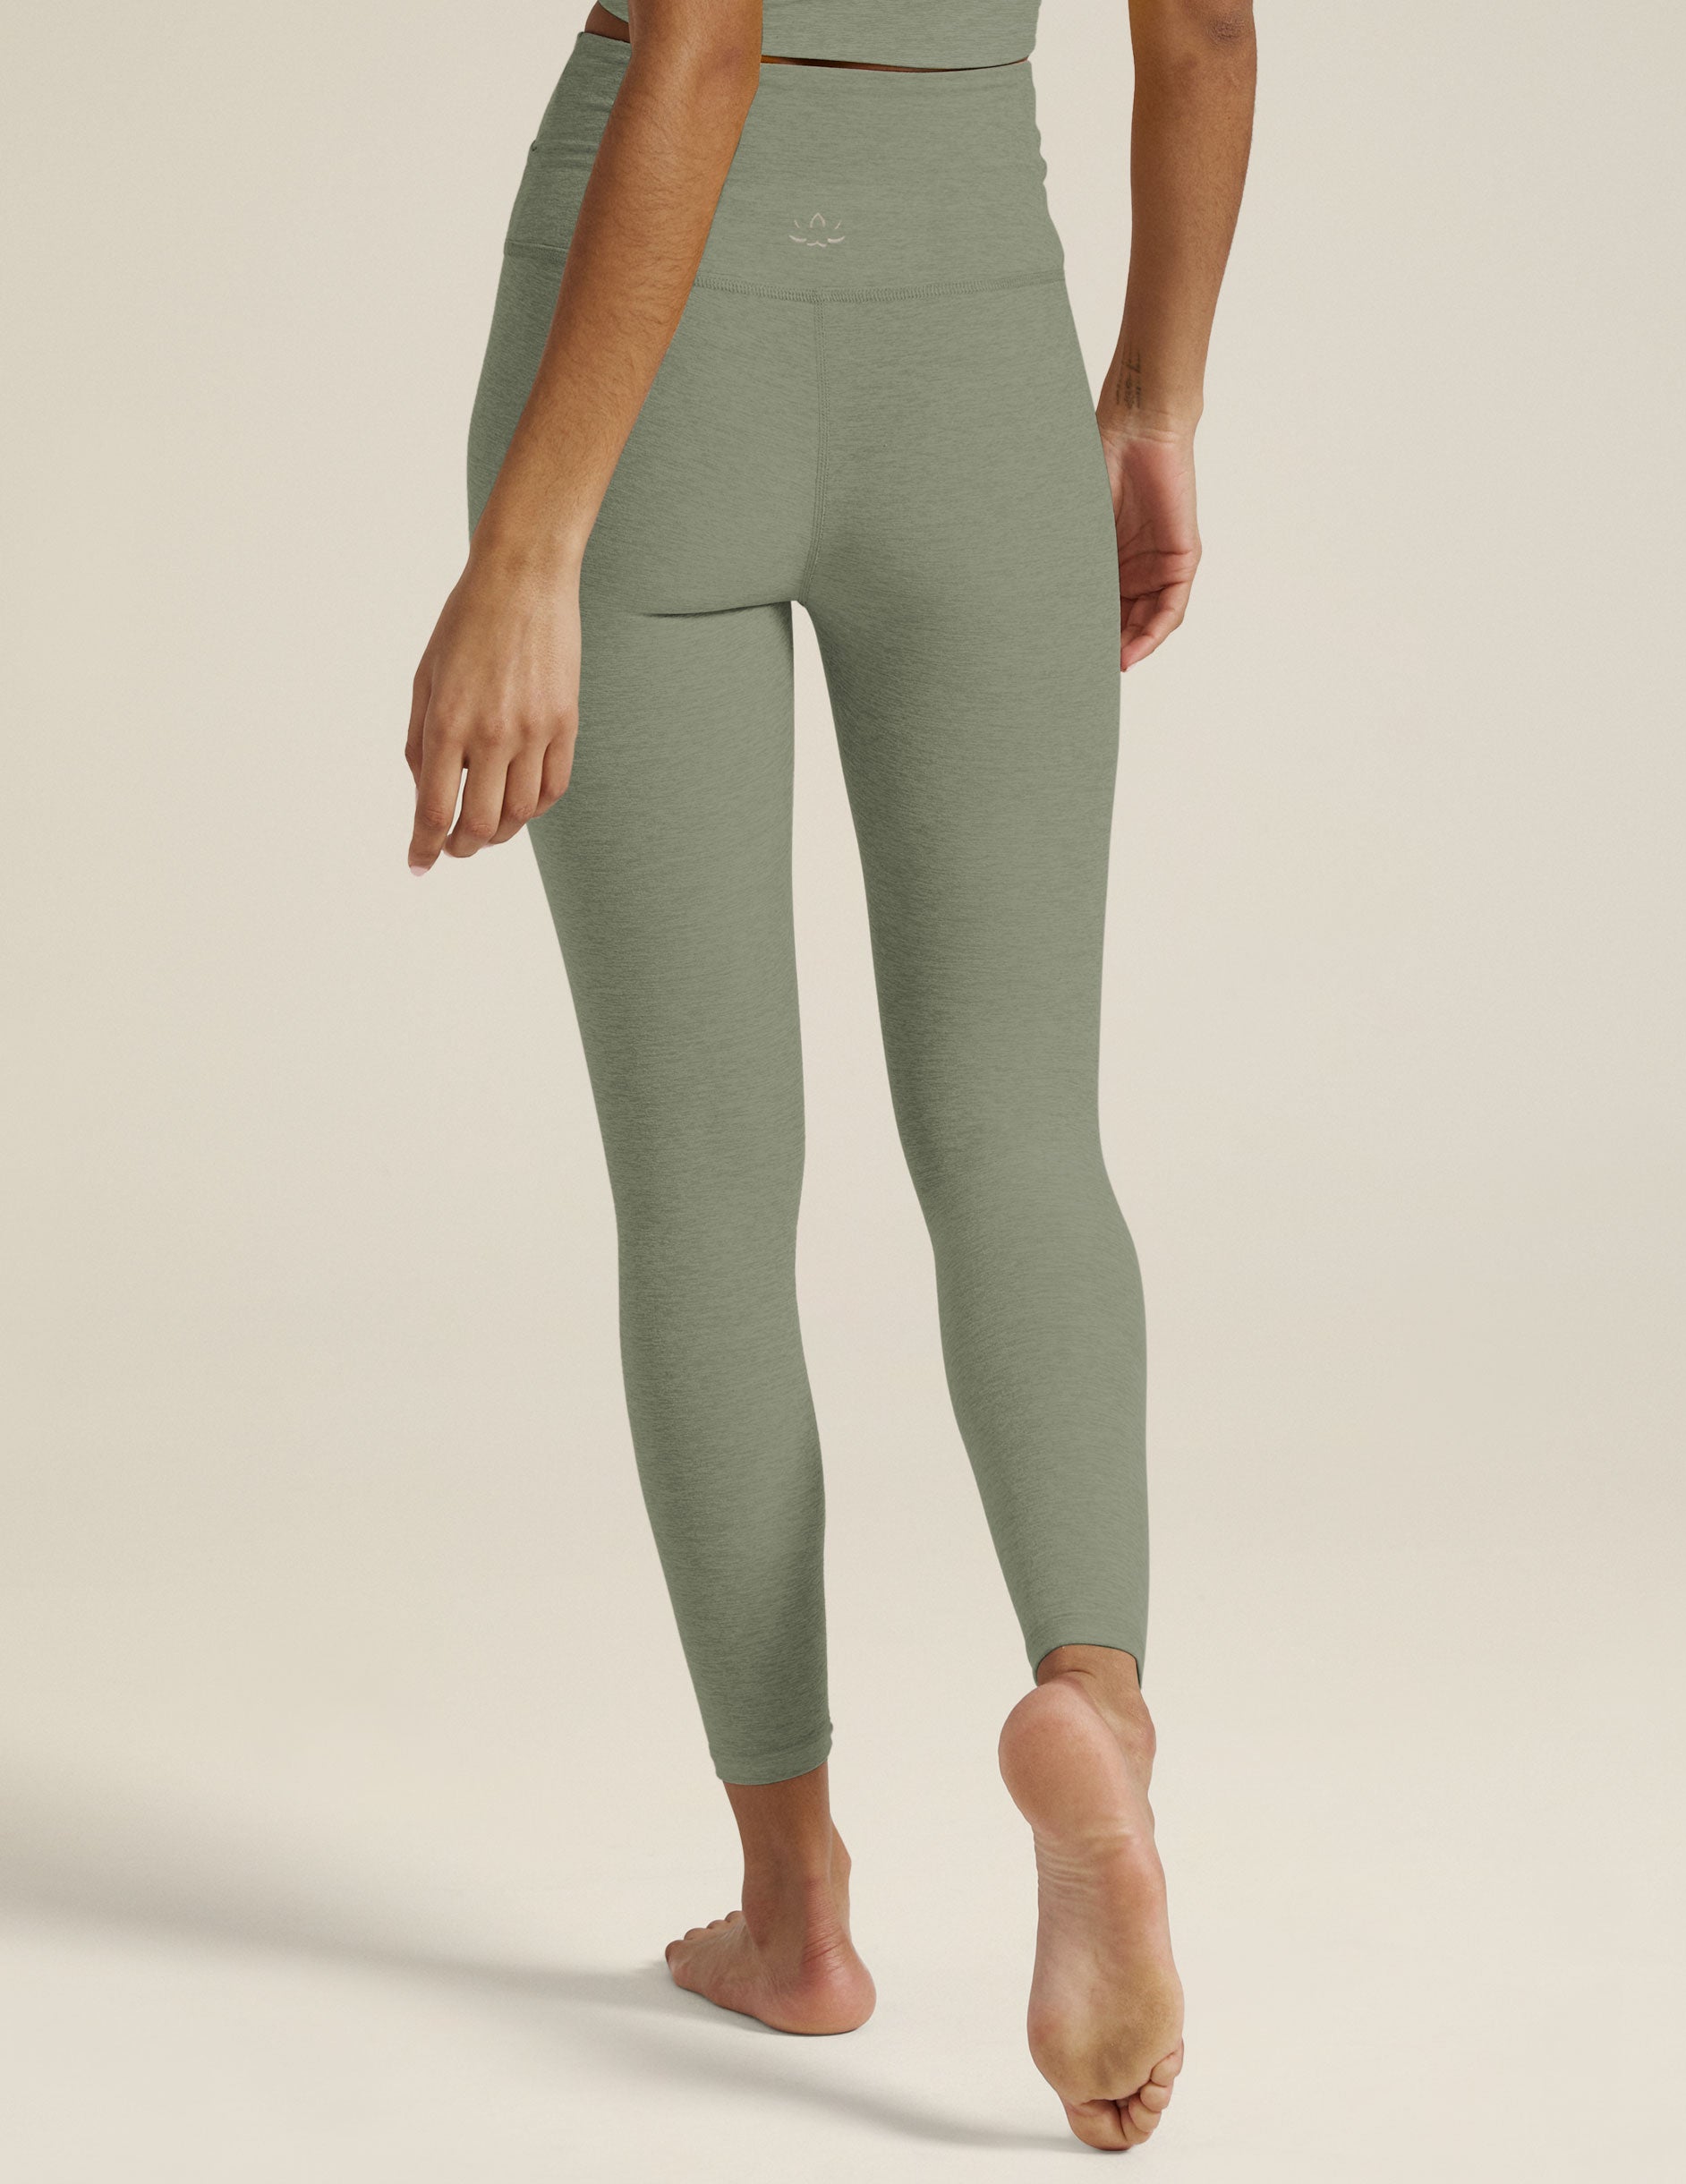 green midi leggings with crossover design on front waistband